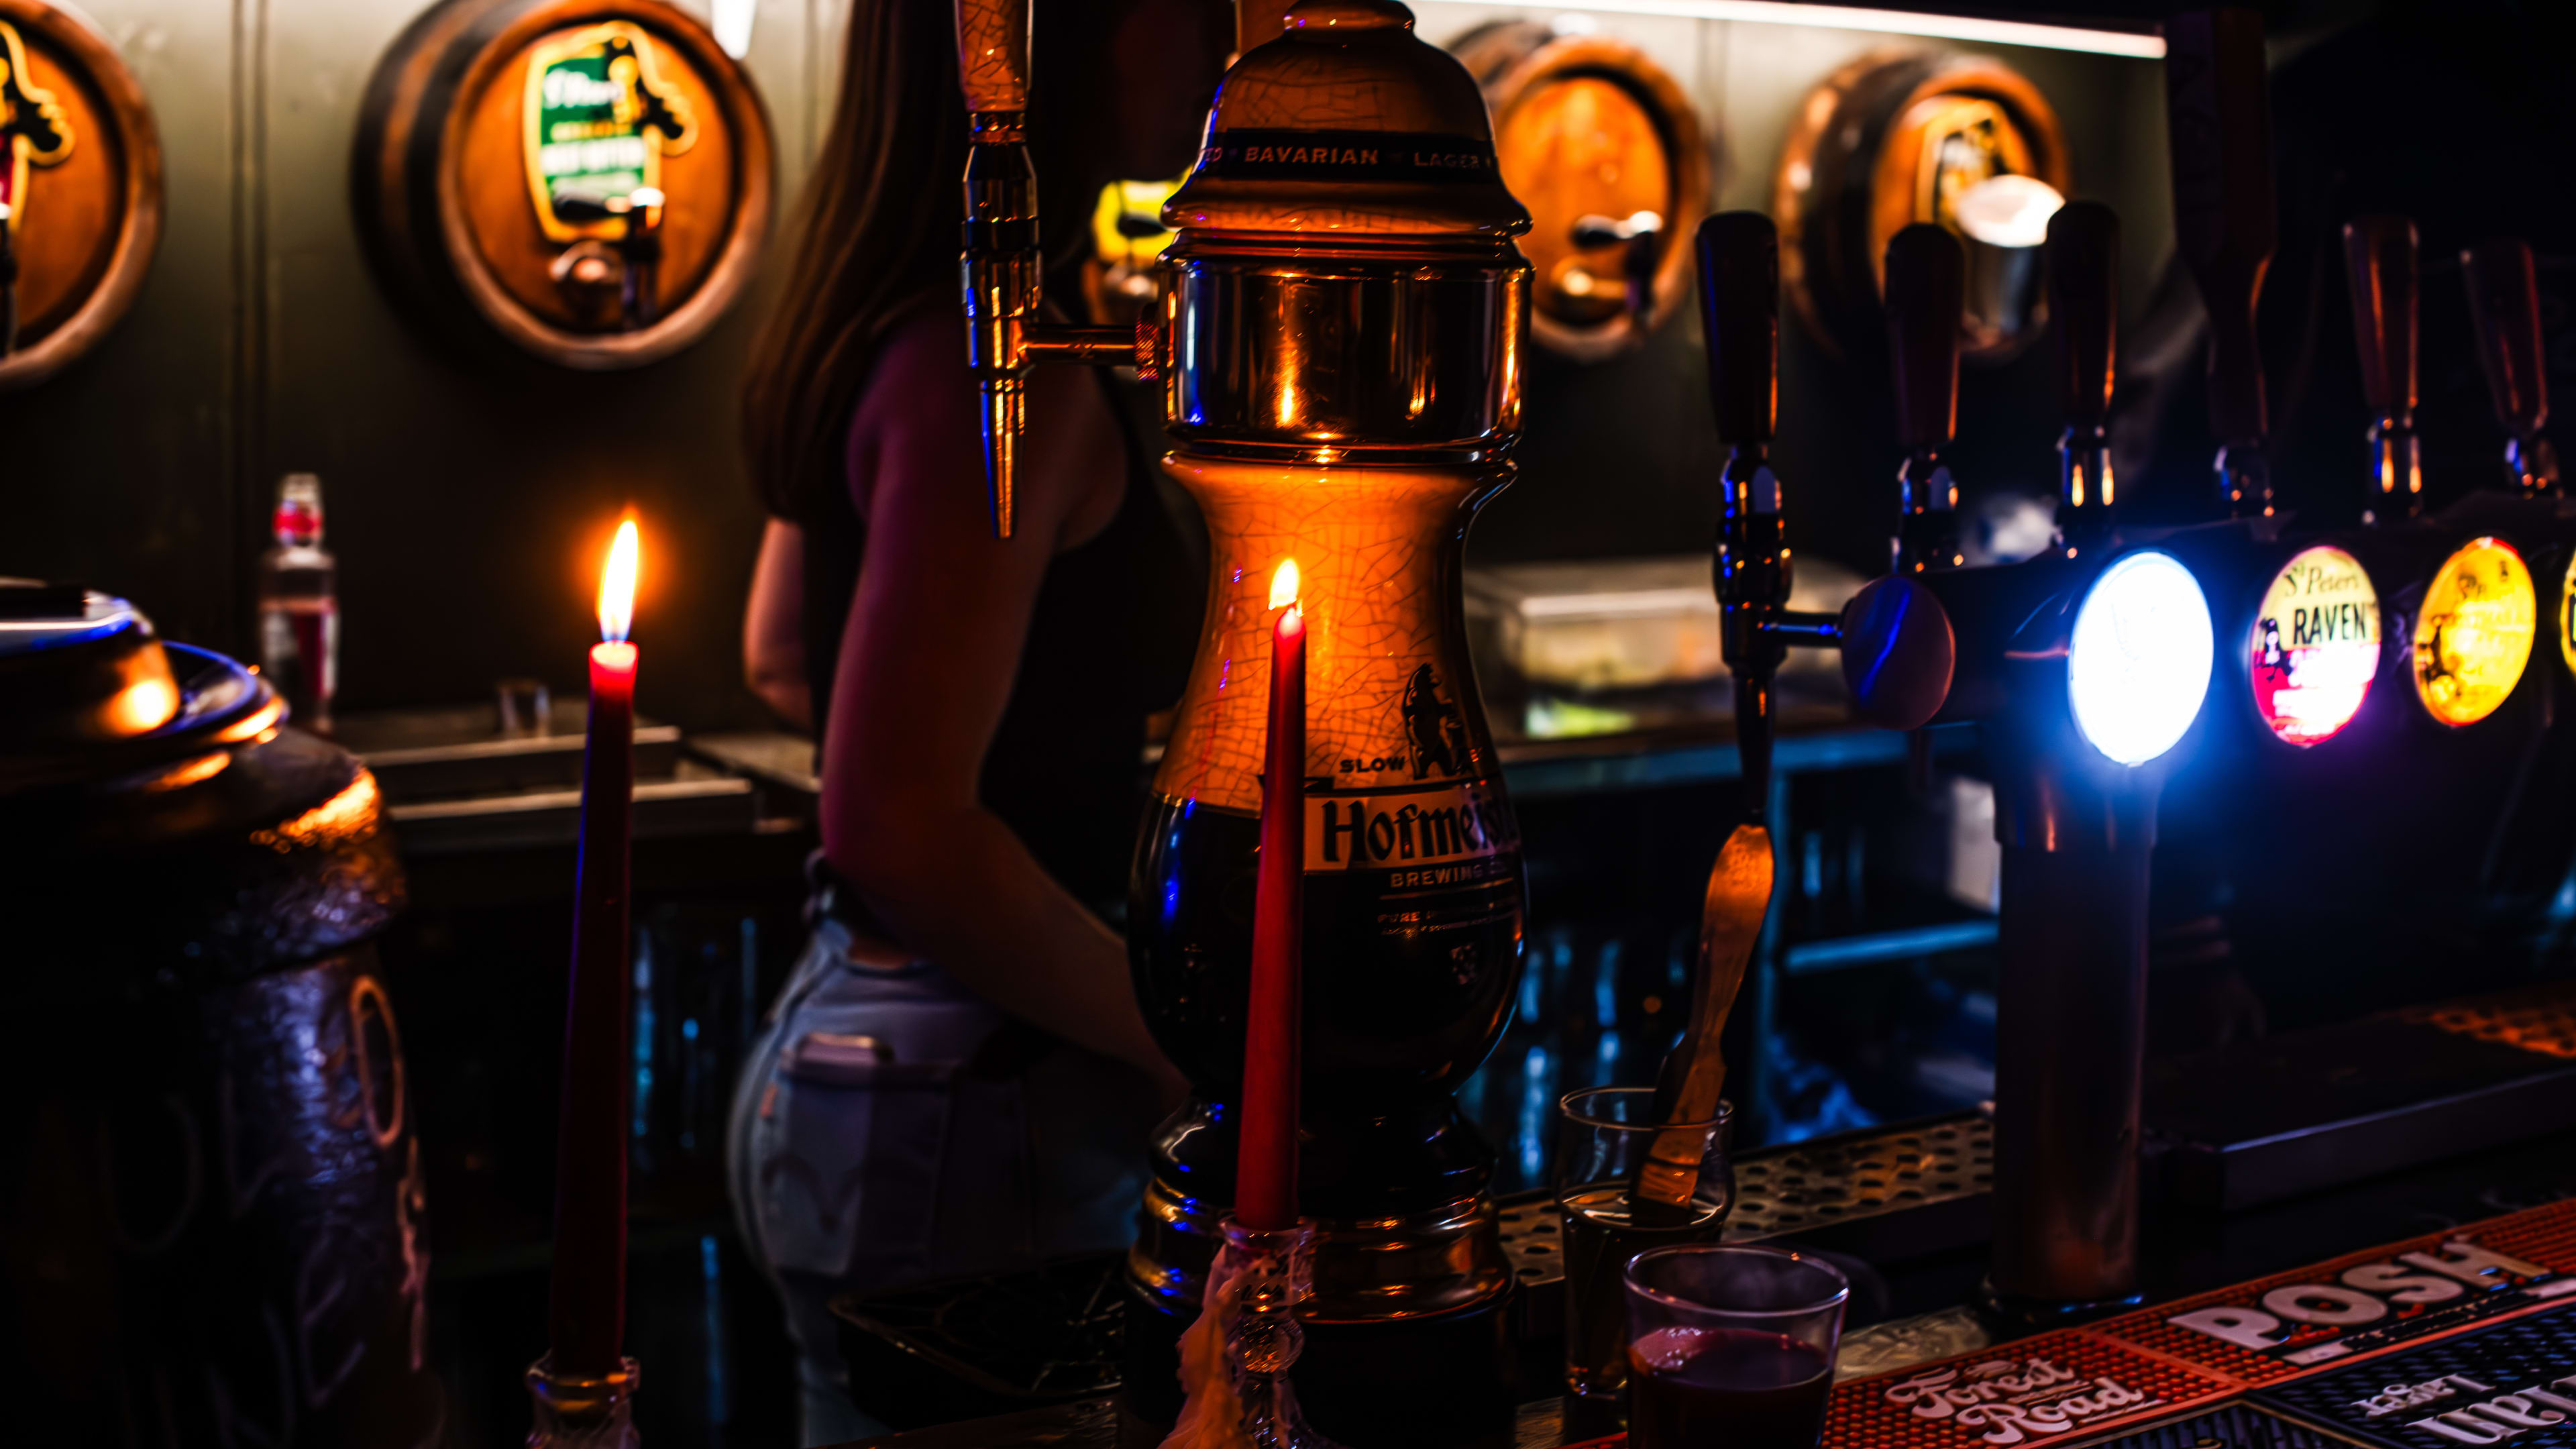 A pint of Guinness on a candlelit bar.